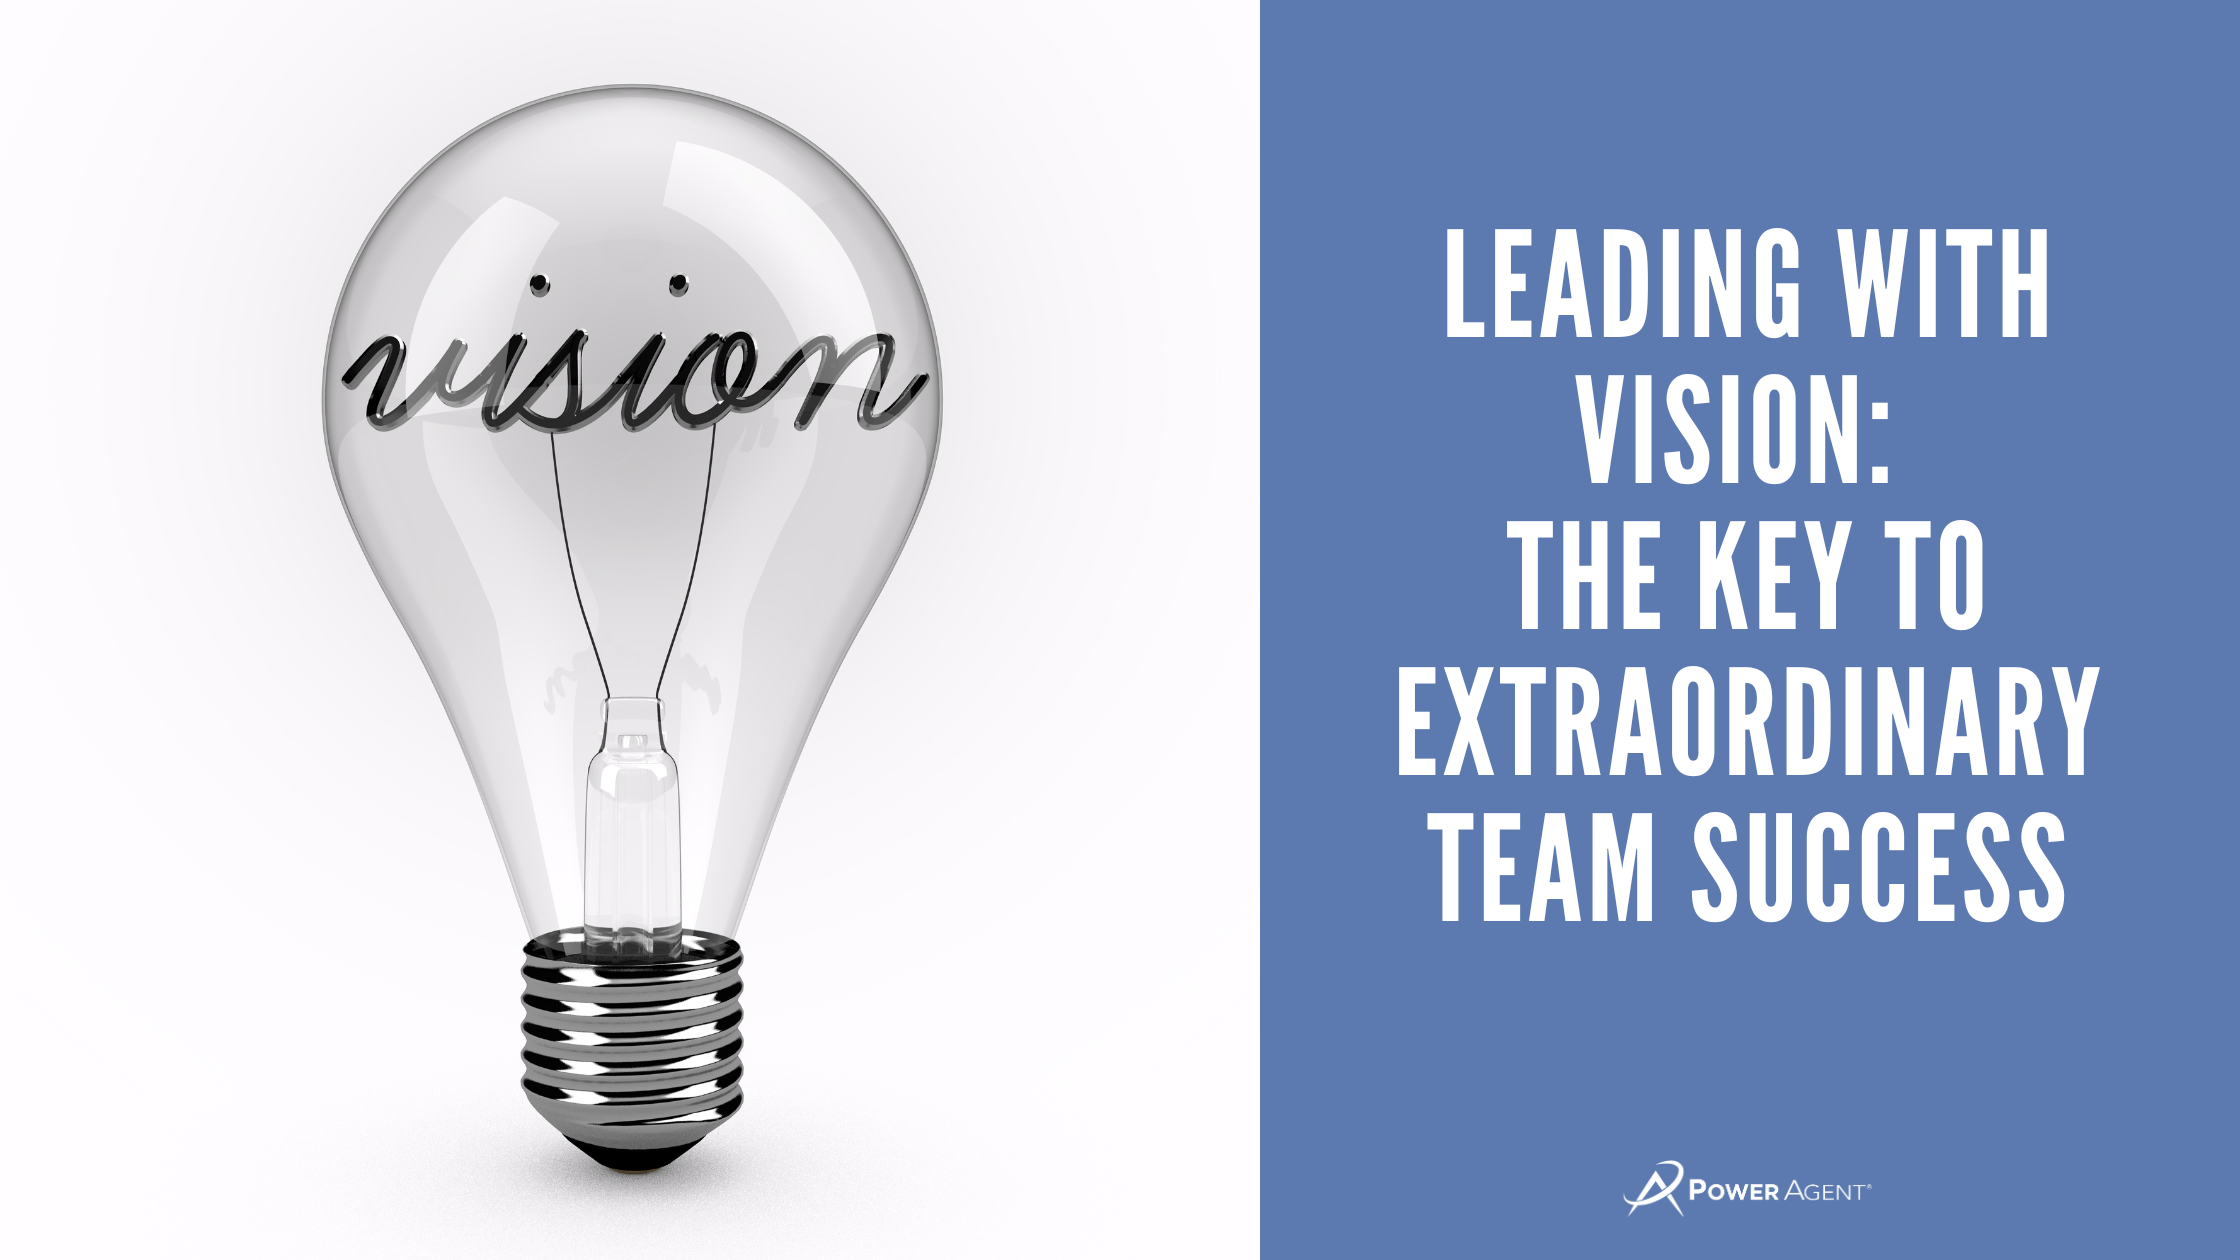 real estate leaders Leading with Vision: The Key to Extraordinary Team Success